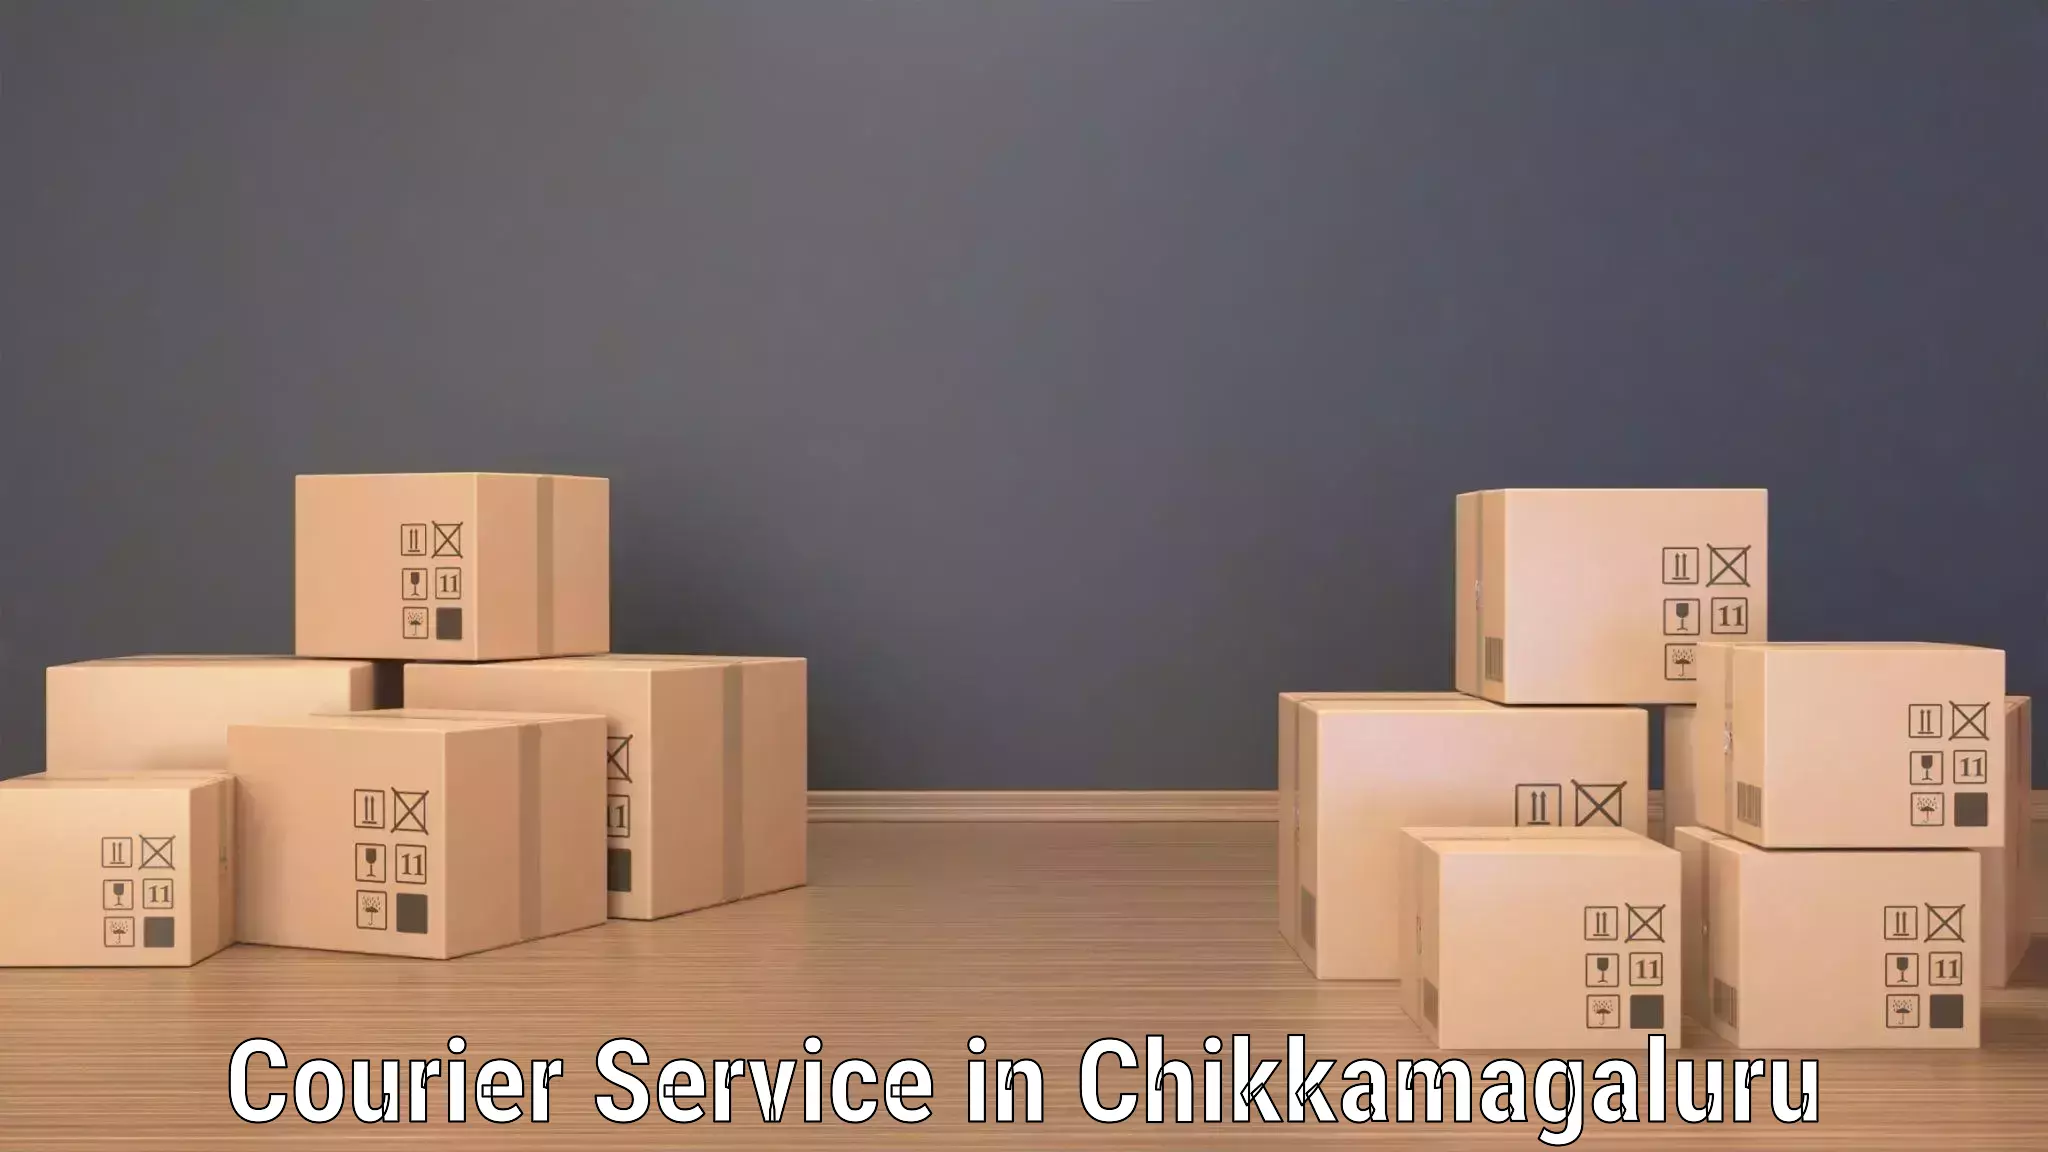 Global shipping solutions in Chikkamagaluru